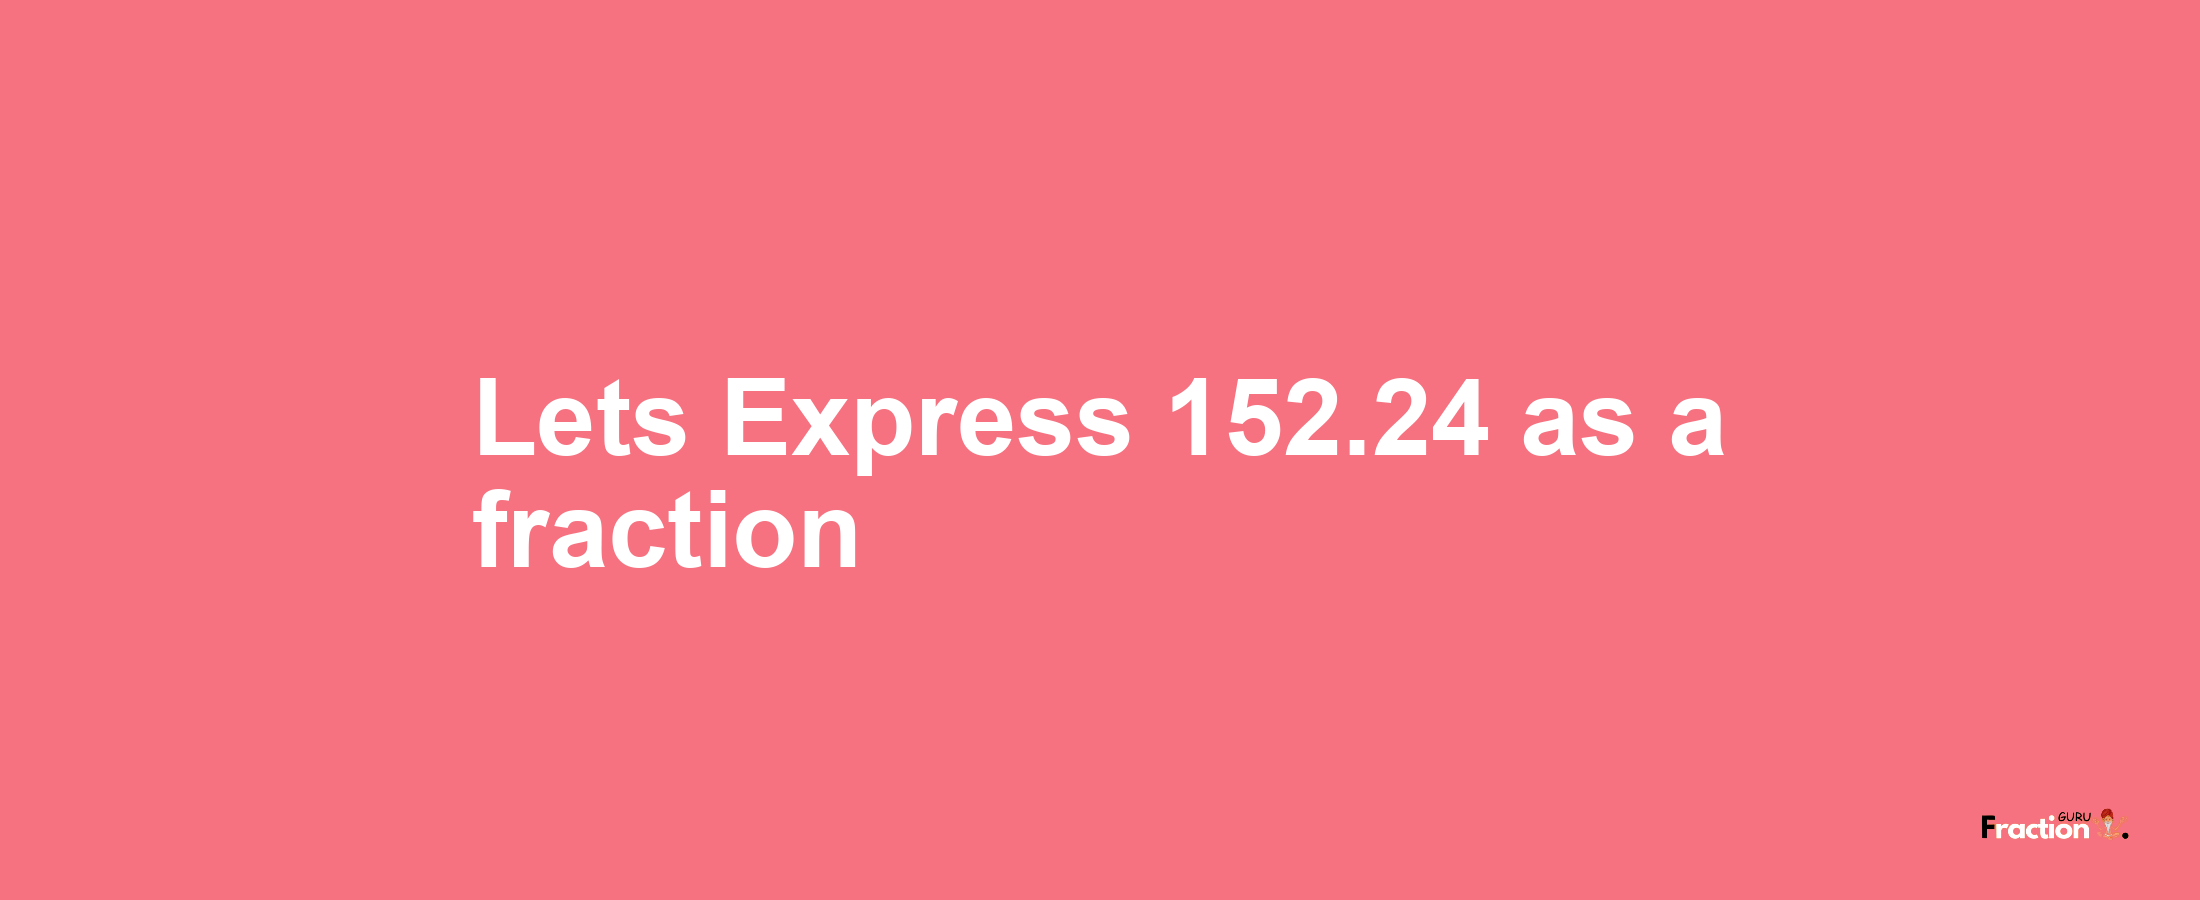 Lets Express 152.24 as afraction